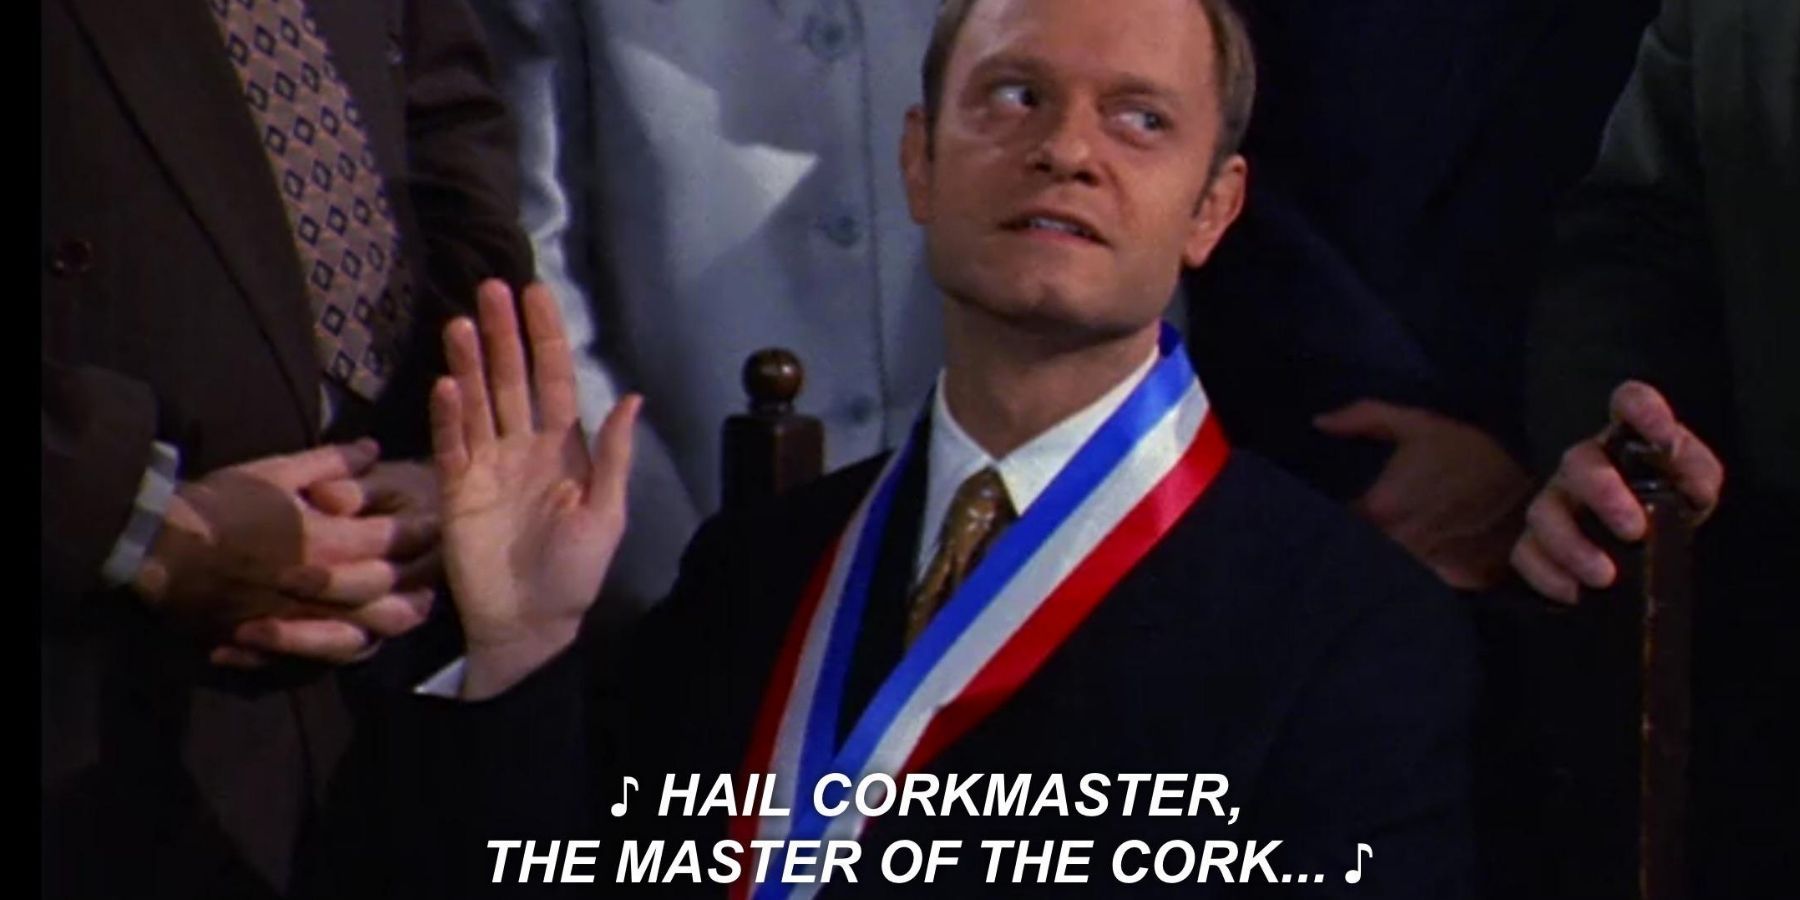 Niles becomes corkmaster of the Whine Club